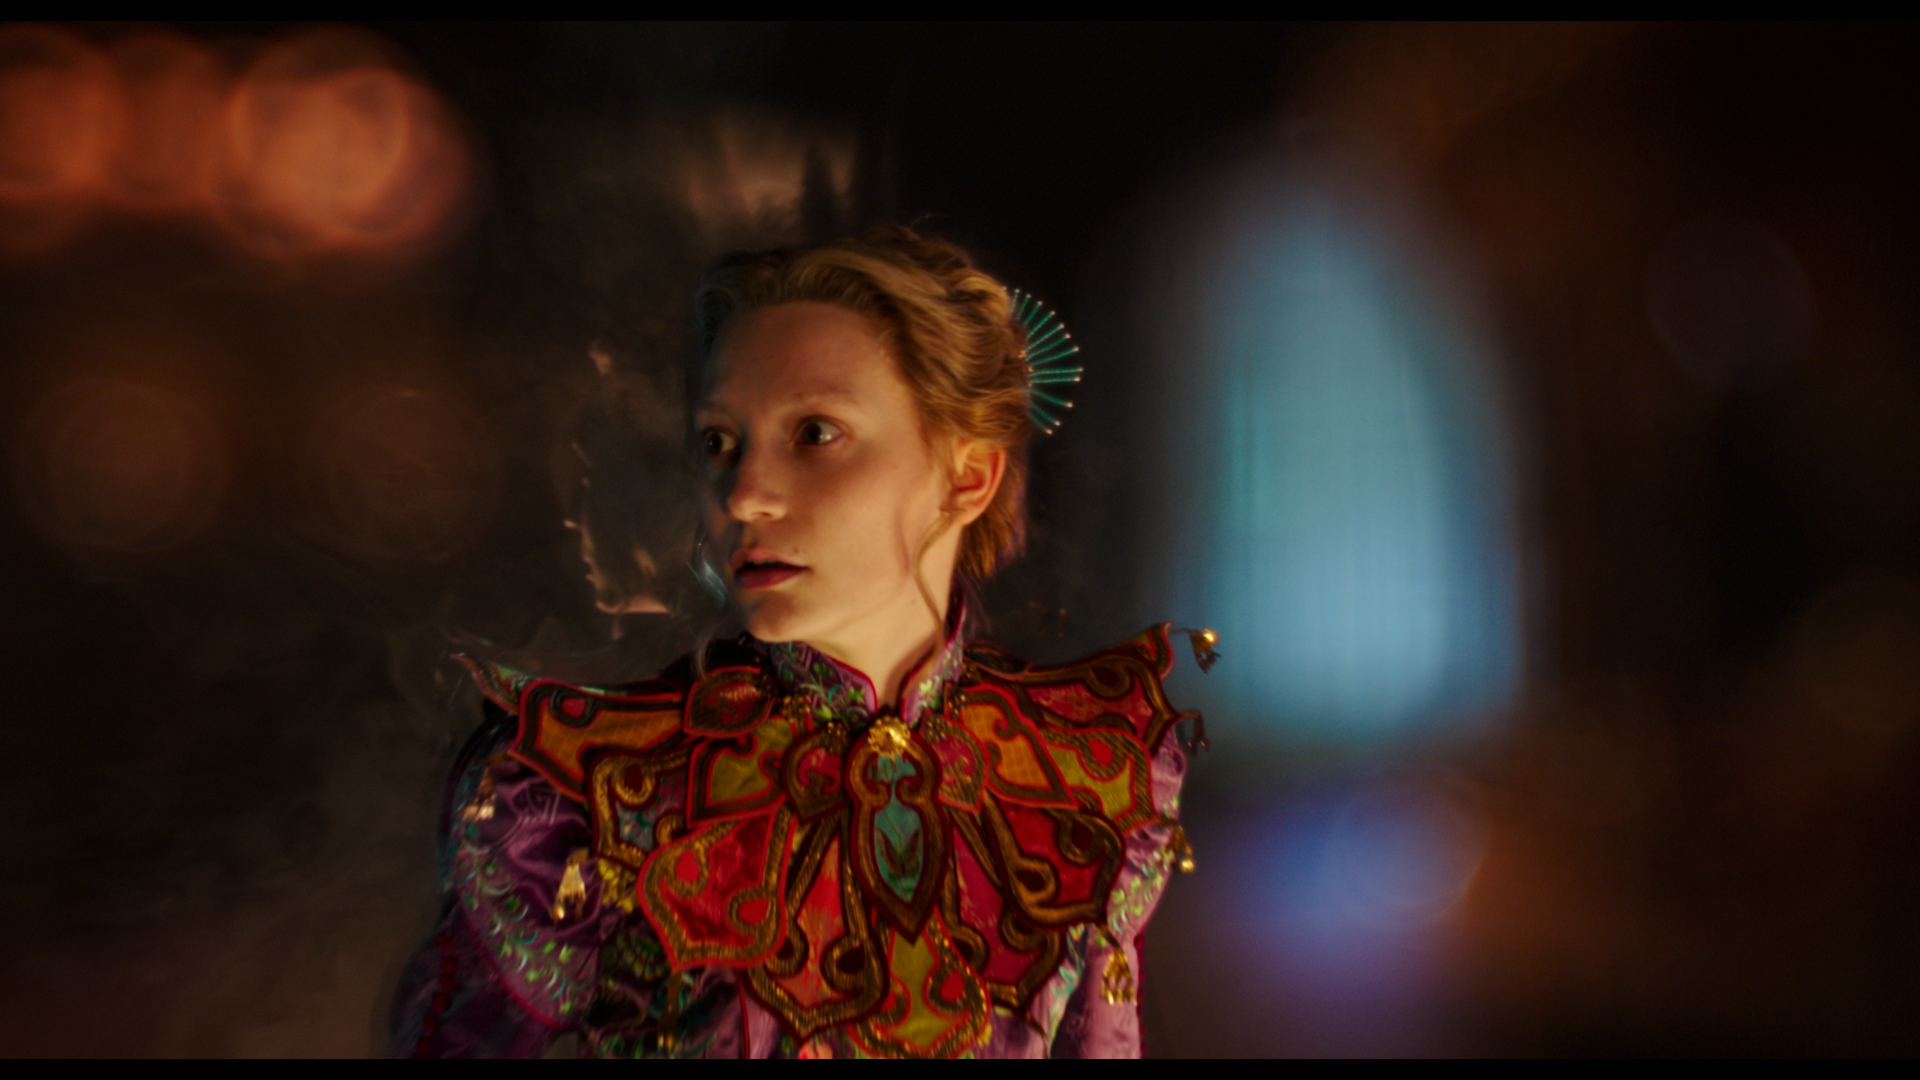 Alice (Mia Wasikowska) returns to the whimsical world of Underland in Disney's ALICE THROUGH THE LOOKING GLASS, an all-new adventure featuring the unforgettable characters from Lewis Carroll's beloved stories.